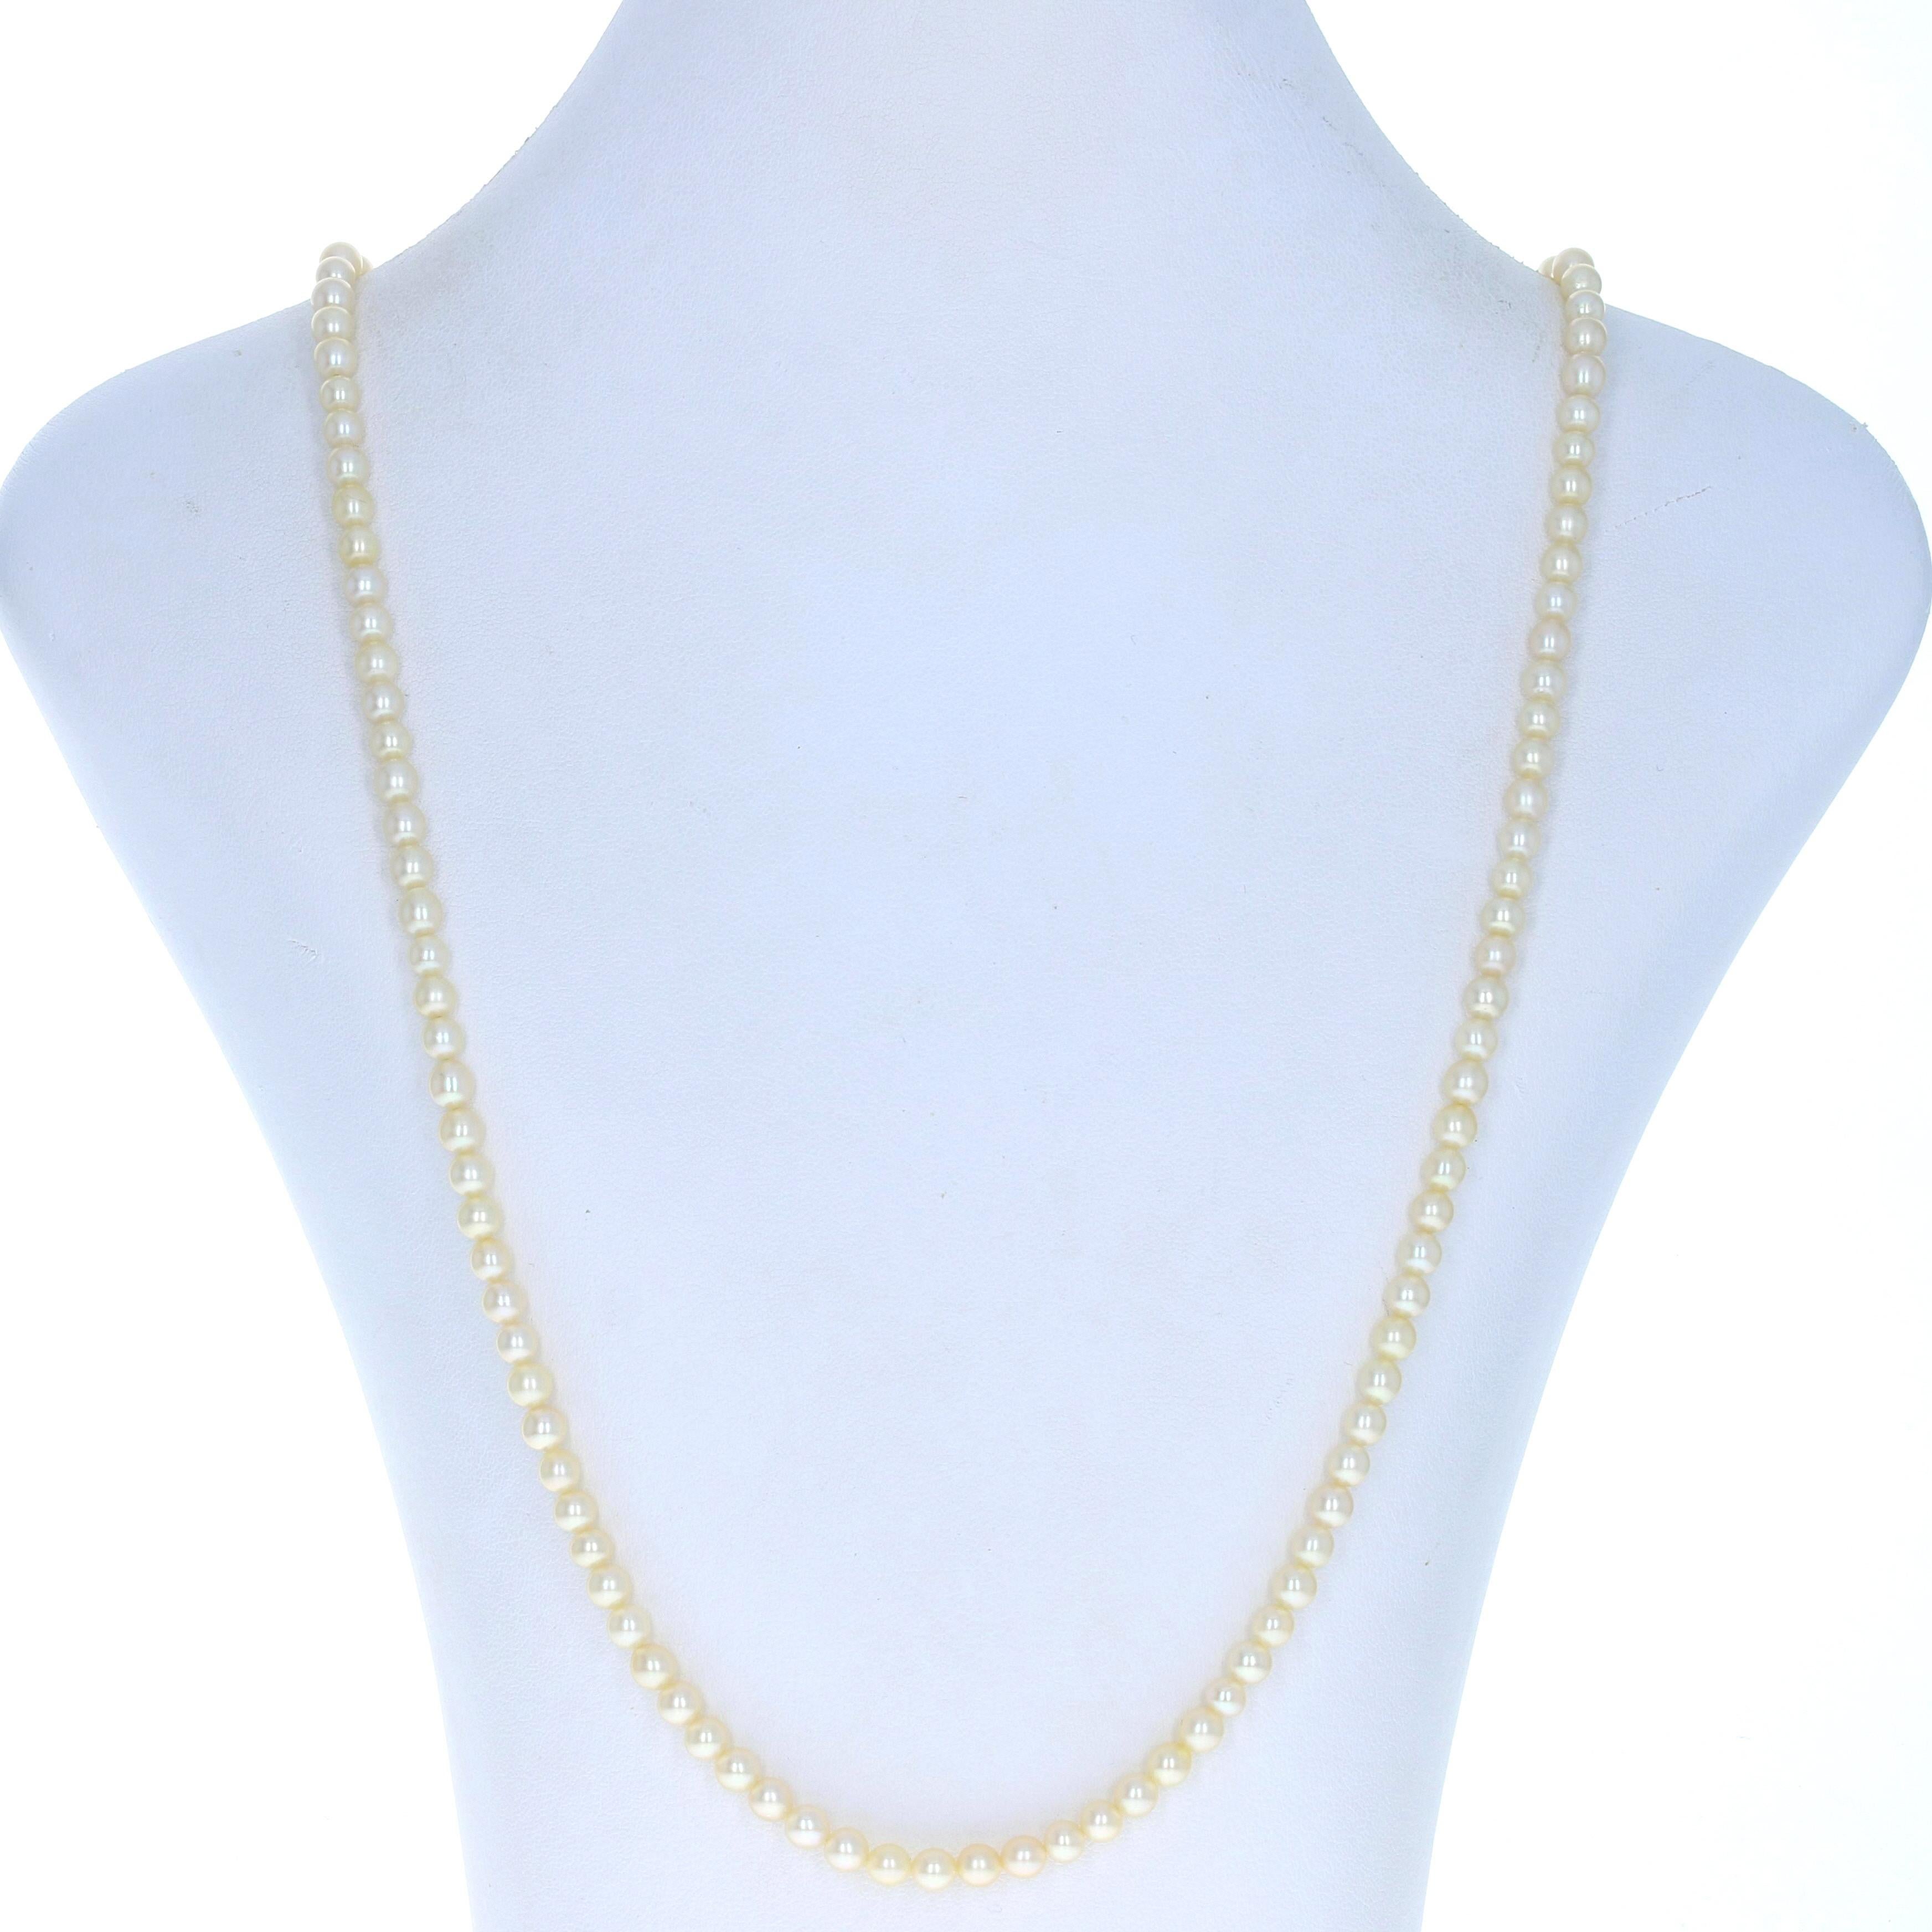 White Gold Cultured Pearl Strand Necklace 25" - 8k Fishhook Clasp 4.9mm